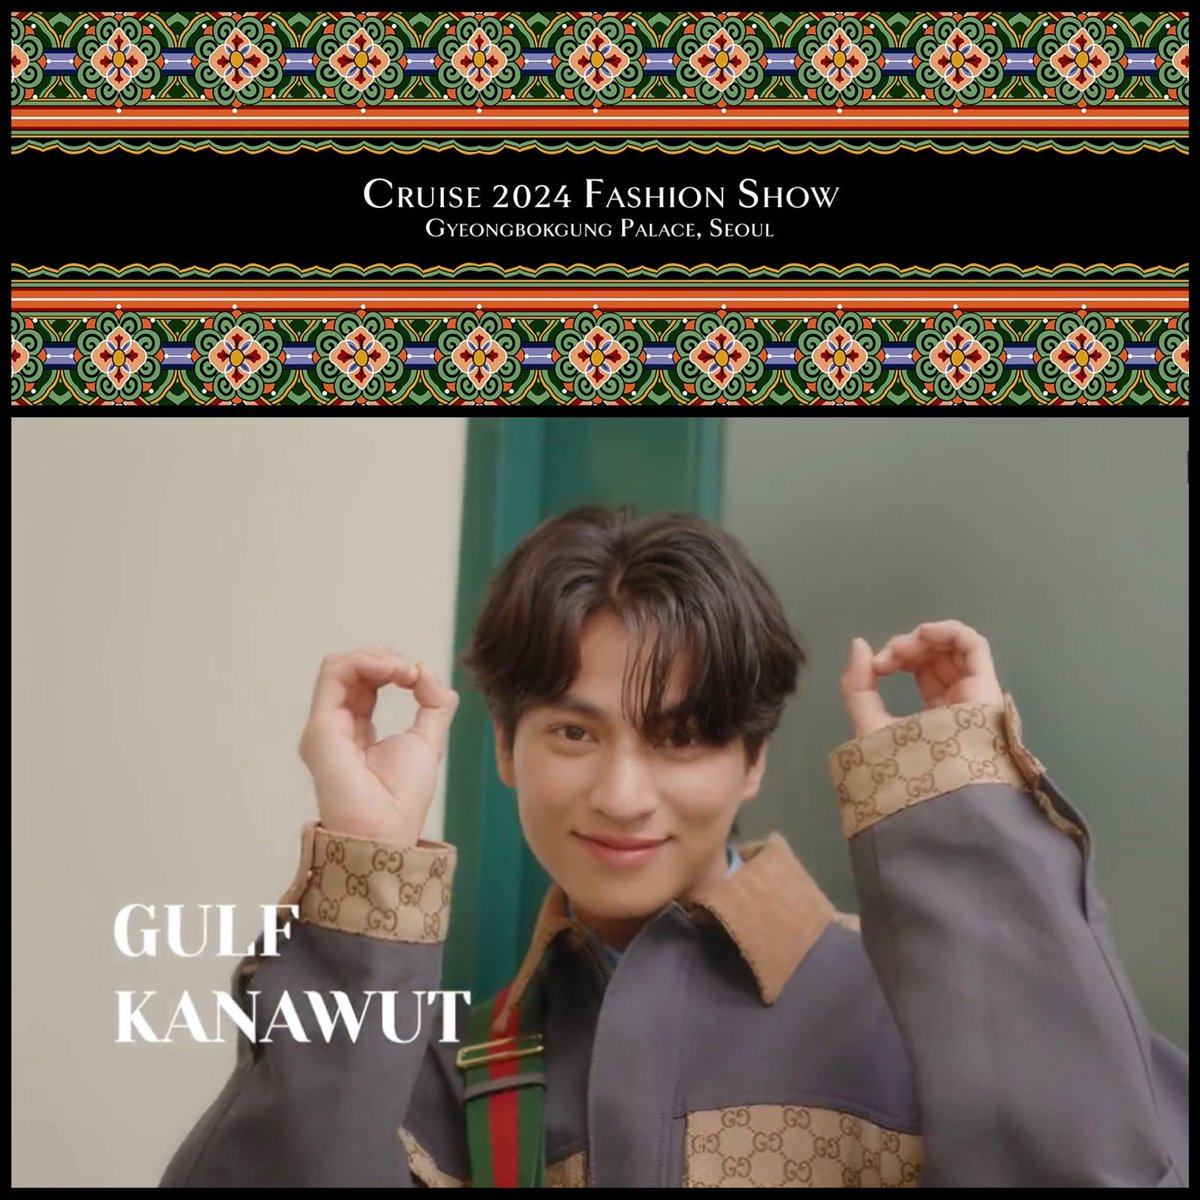 Our Friend of Gucci Thailand @gulfkanawut will arrives in Seoul today for the #GucciCruise24 fashion show. Stay tuned as the event is livestreamed from Gyeongbokgung Palace on Tuesday, May 16 at 8:00 p.m. KST.

Proud of you, safe flight~~ᕕ( ᐛ )ᕗ 

#GUCCIxGULFtoSeoul